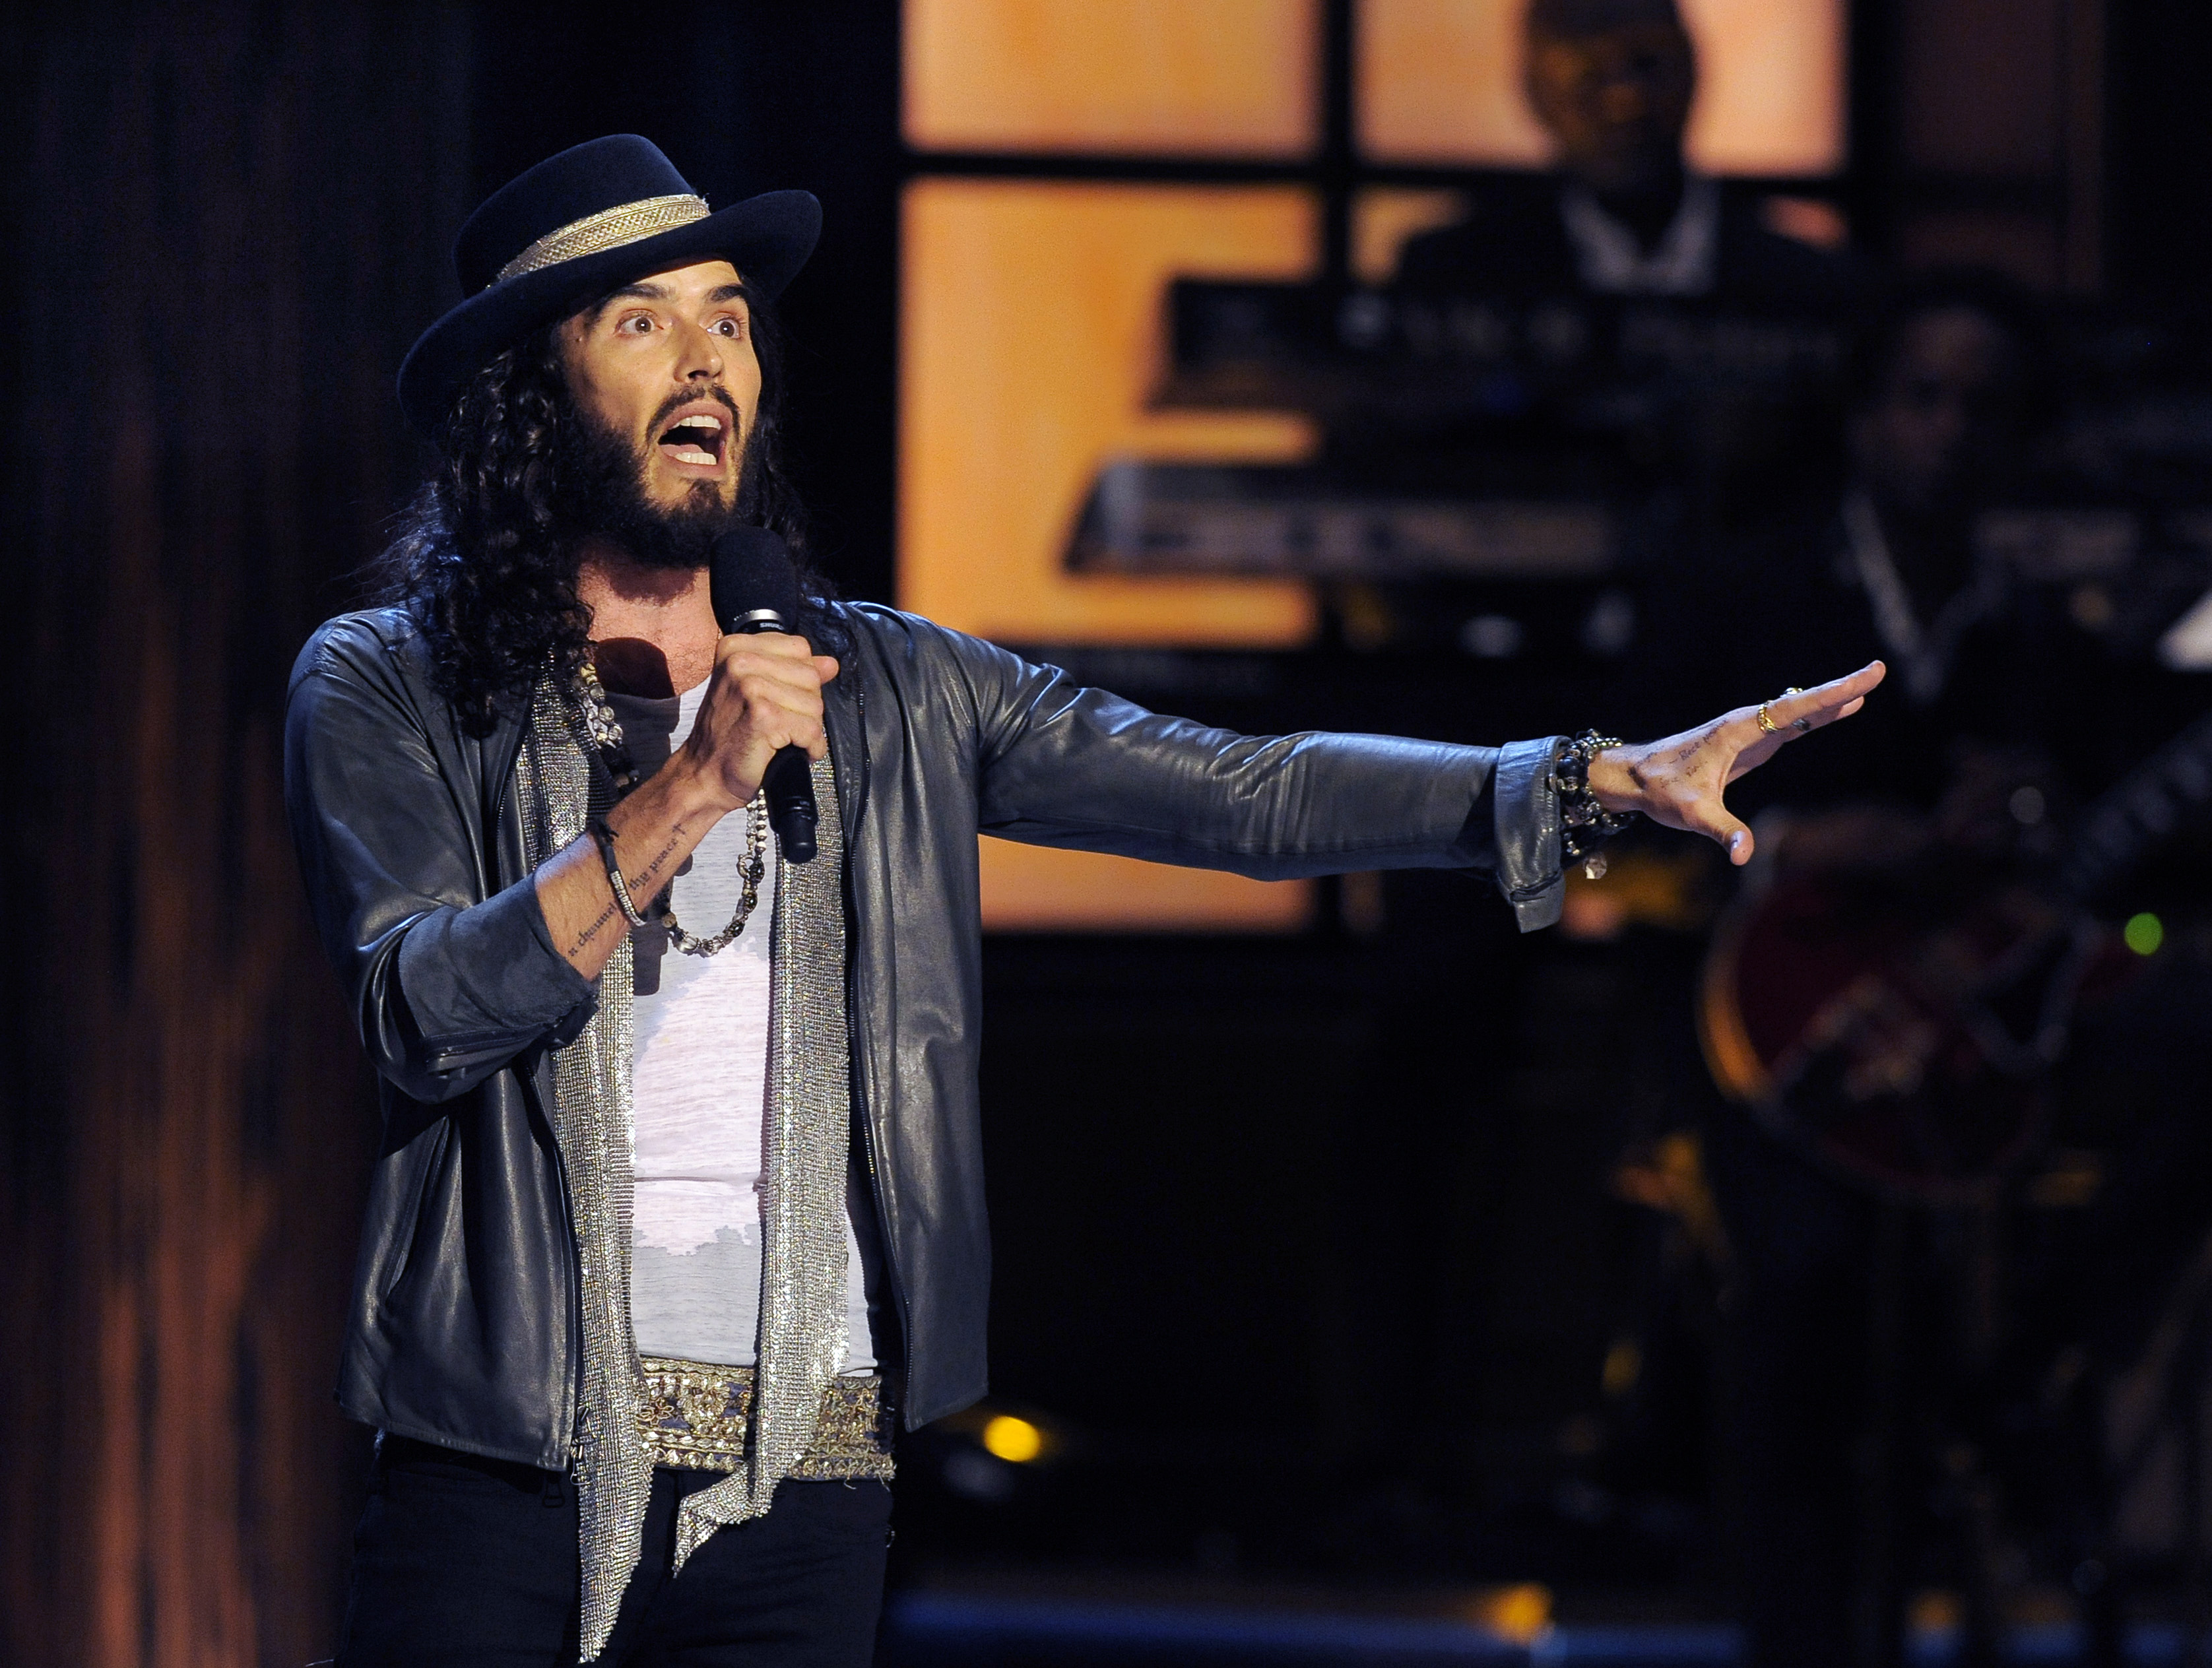 Russell Brand, here performing on stage, has denied allegations of sexual assault. (Chris Pizzello/Invision / AP)